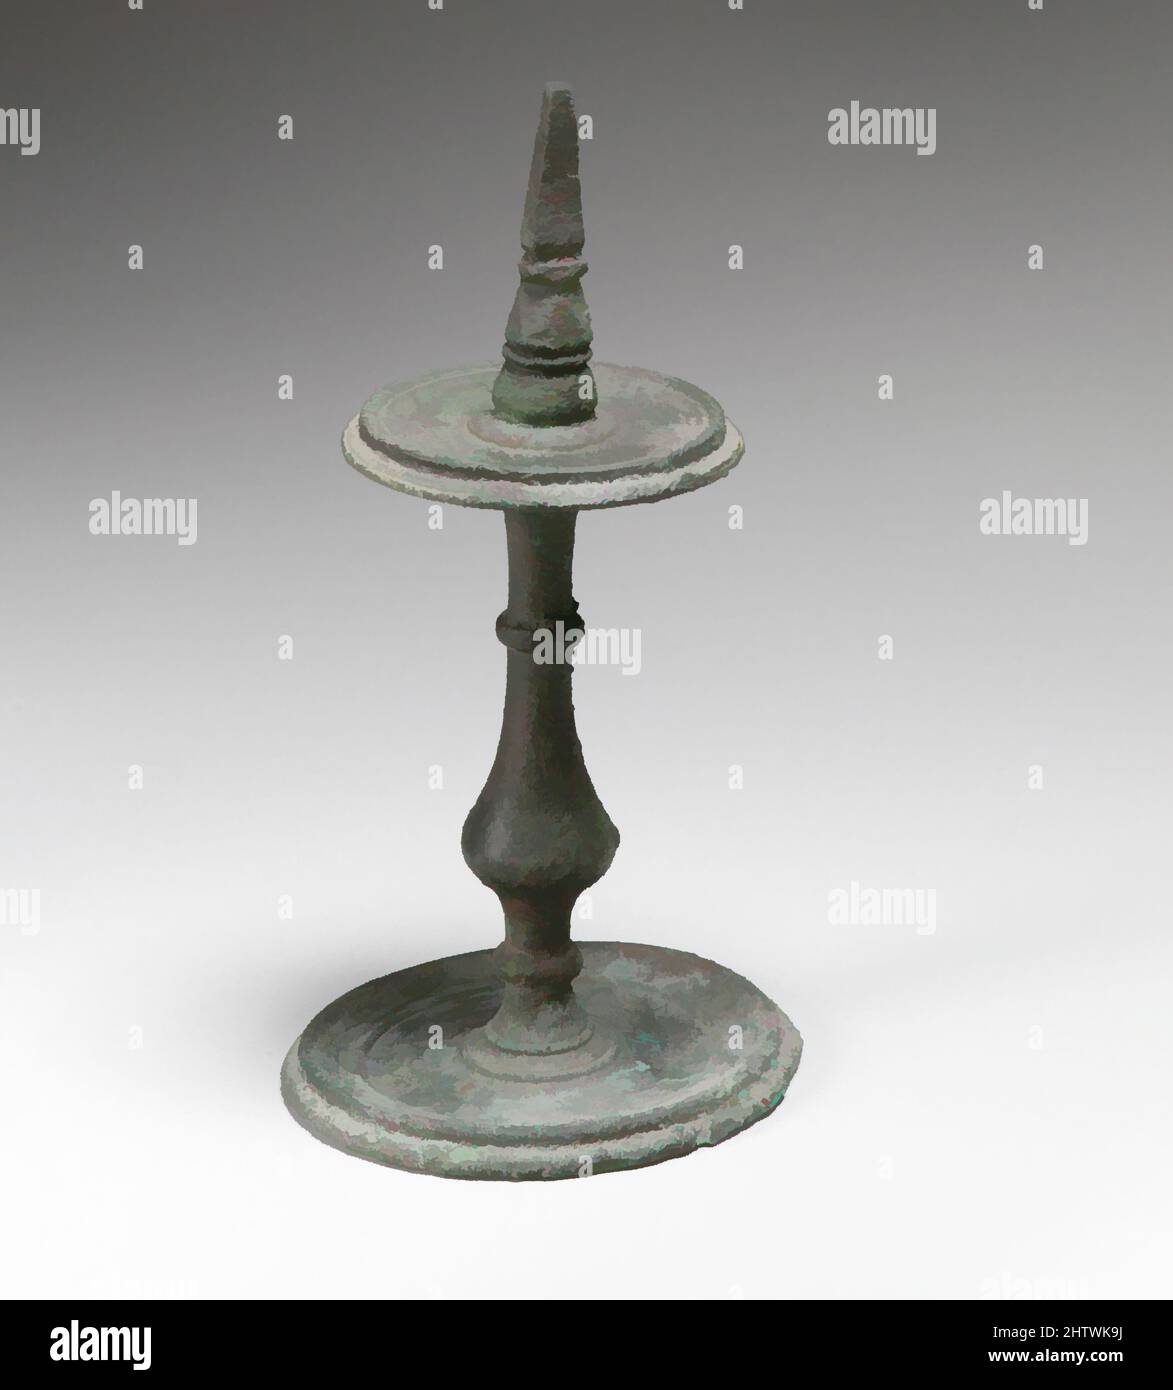 Art inspired by Bronze lampstand, Late Imperial, ca. 4th century A.D., Roman, Bronze, H. 5 13/16 in. (14.7 cm), Bronzes, The stand is associated with the bronze lamp that fits on the tapering pricket at the top, but such stands could also be used as candlesticks, Classic works modernized by Artotop with a splash of modernity. Shapes, color and value, eye-catching visual impact on art. Emotions through freedom of artworks in a contemporary way. A timeless message pursuing a wildly creative new direction. Artists turning to the digital medium and creating the Artotop NFT Stock Photo